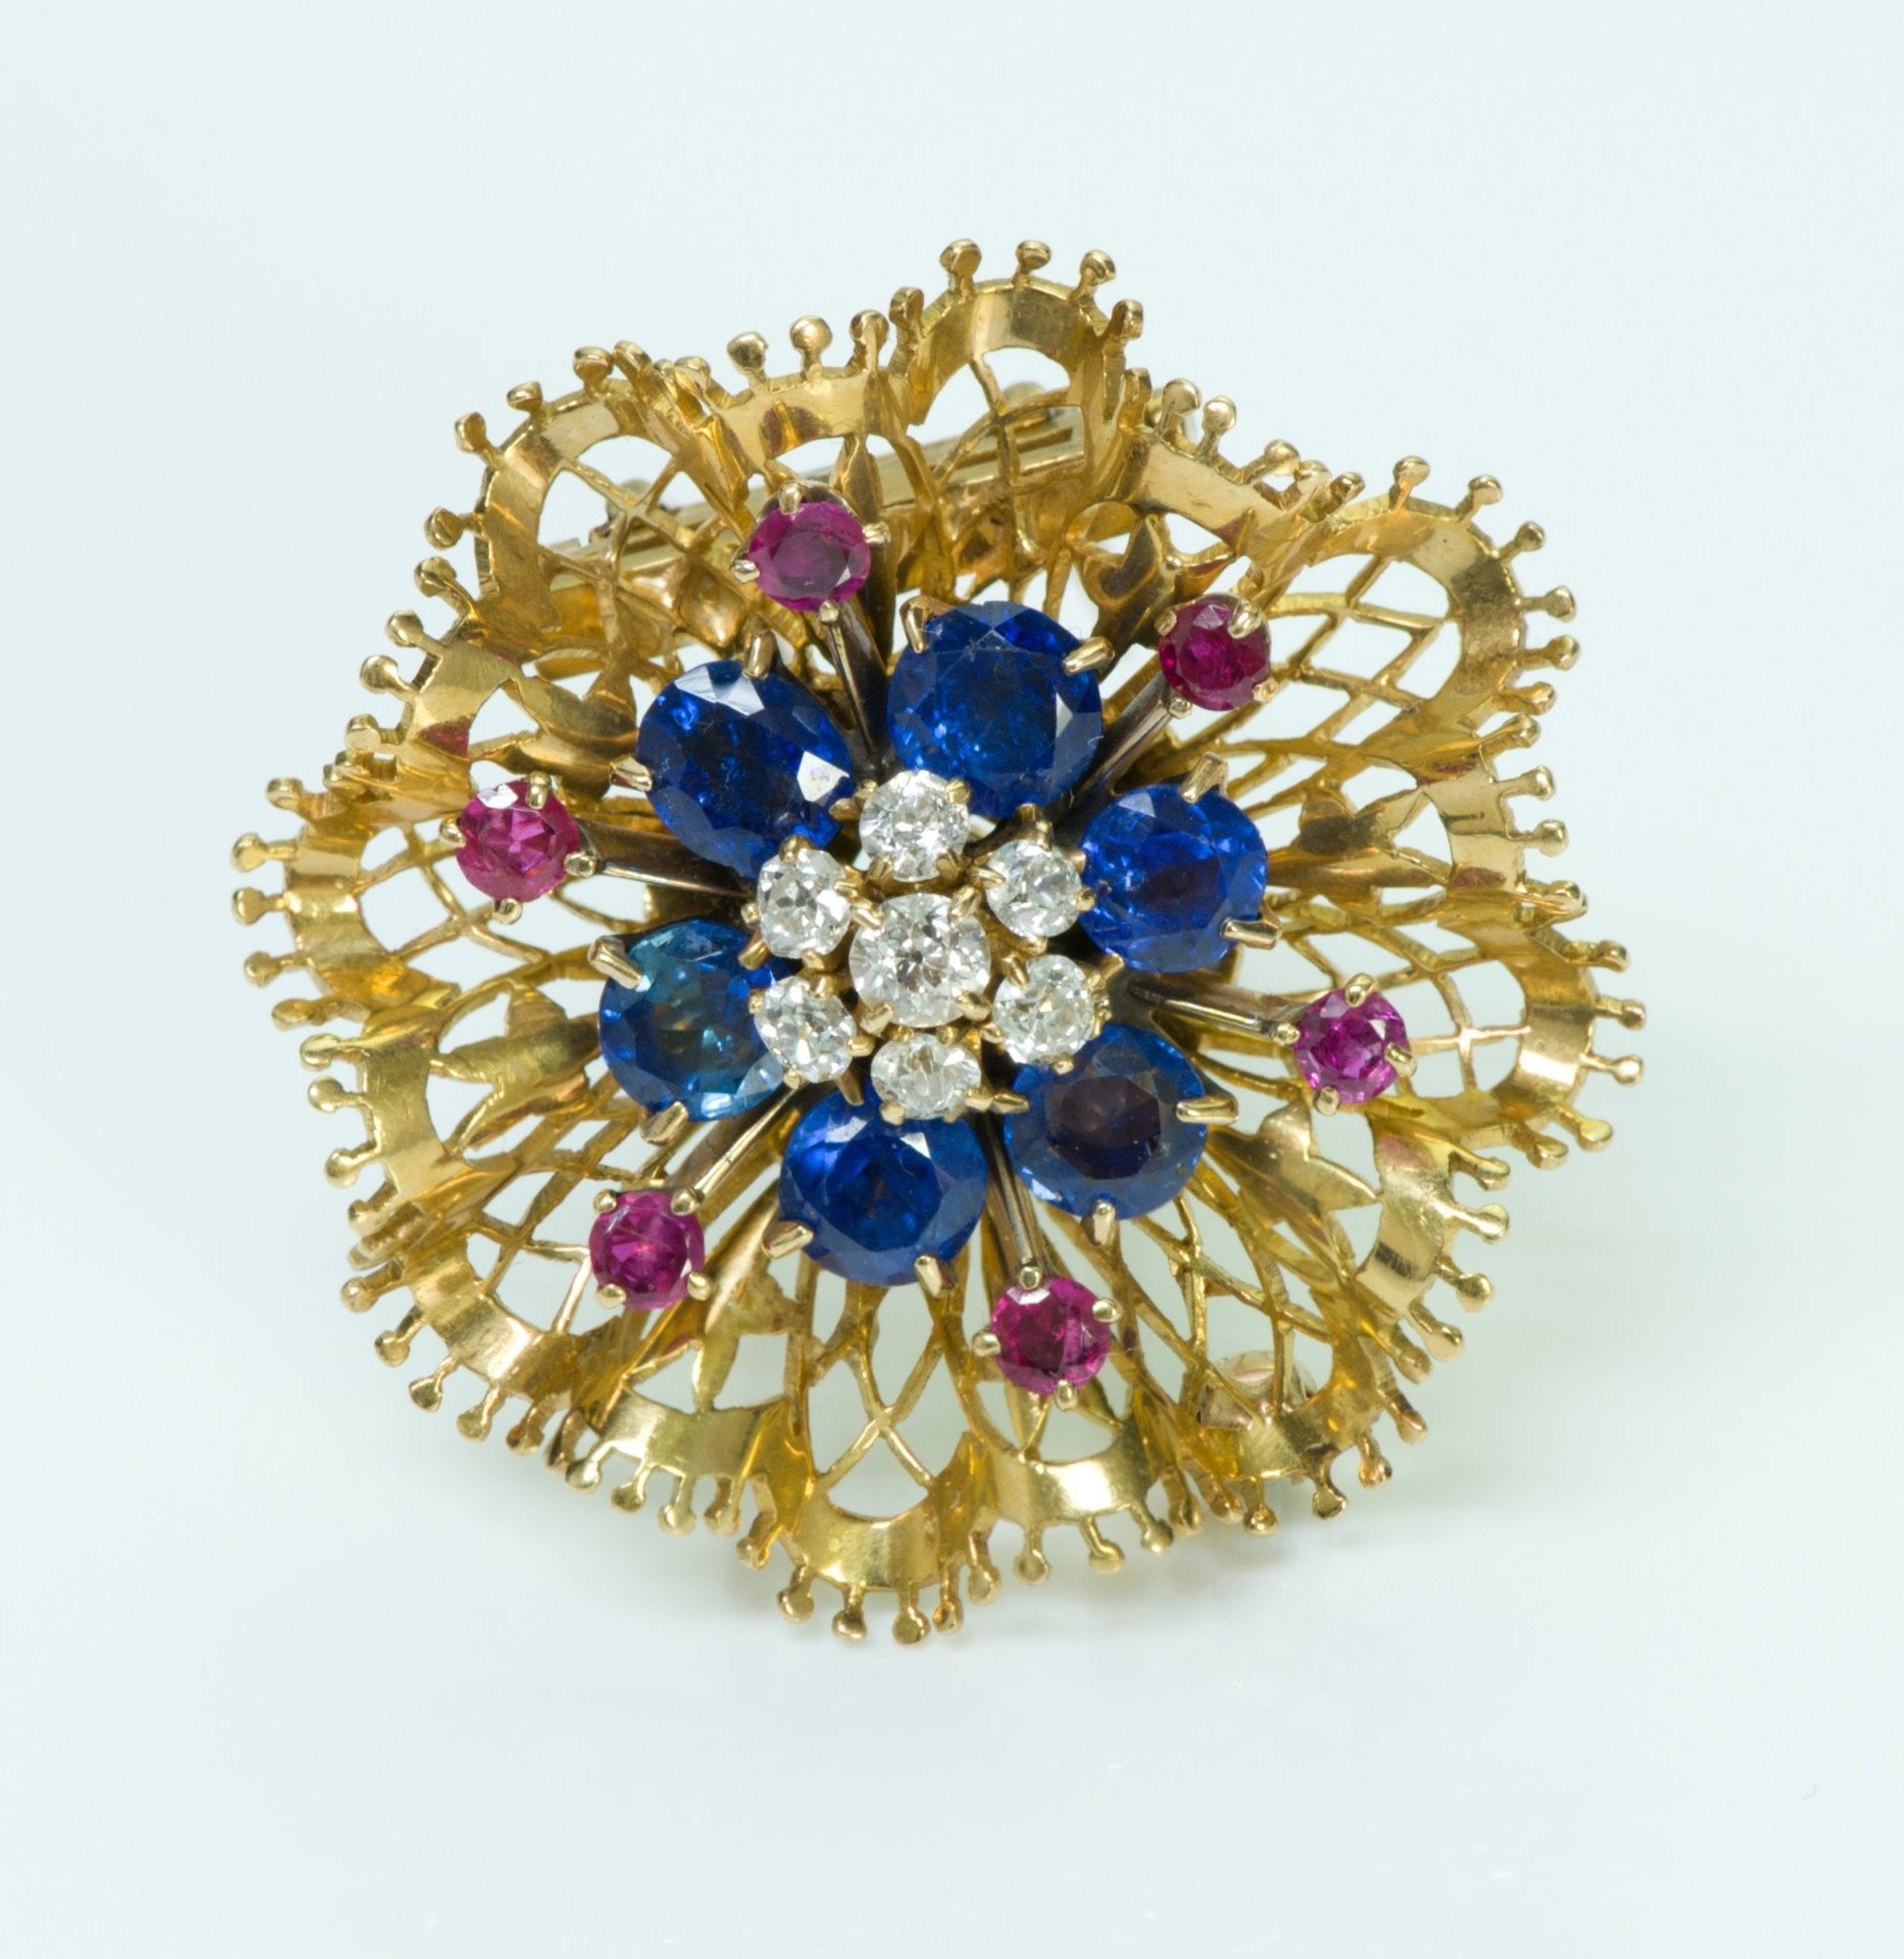 Van Cleef and Arpels: The Finest Stones the Highest Standards - DSF Antique Jewelry